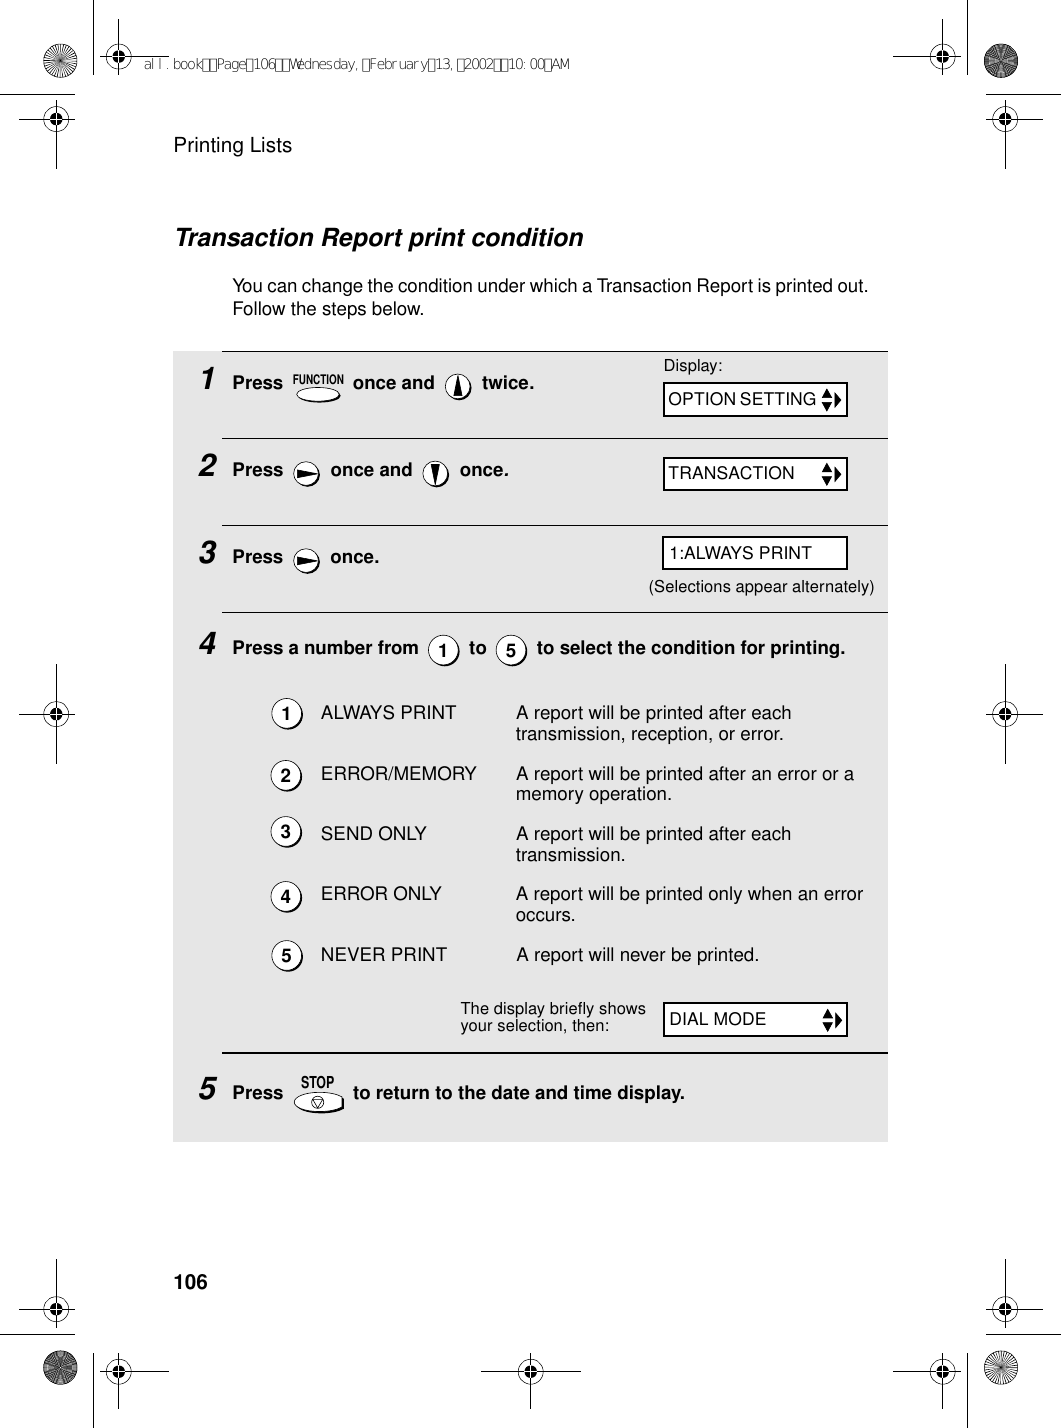 Printing Lists106Transaction Report print conditionYou can change the condition under which a Transaction Report is printed out. Follow the steps below.1Press   once and   twice.2Press   once and   once.3Press  once.4Press a number from   to   to select the condition for printing.5Press   to return to the date and time display.ALWAYS PRINT A report will be printed after each transmission, reception, or error.ERROR/MEMORY A report will be printed after an error or a memory operation.SEND ONLY A report will be printed after each transmission.ERROR ONLY A report will be printed only when an error occurs.NEVER PRINT A report will never be printed.FUNCTION1 5STOPDisplay:The display briefly shows your selection, then:12345OPTION SETTING TRANSACTION DIAL MODE 1:ALWAYS PRINT(Selections appear alternately)all.bookPage106Wednesday,February13,200210:00AM